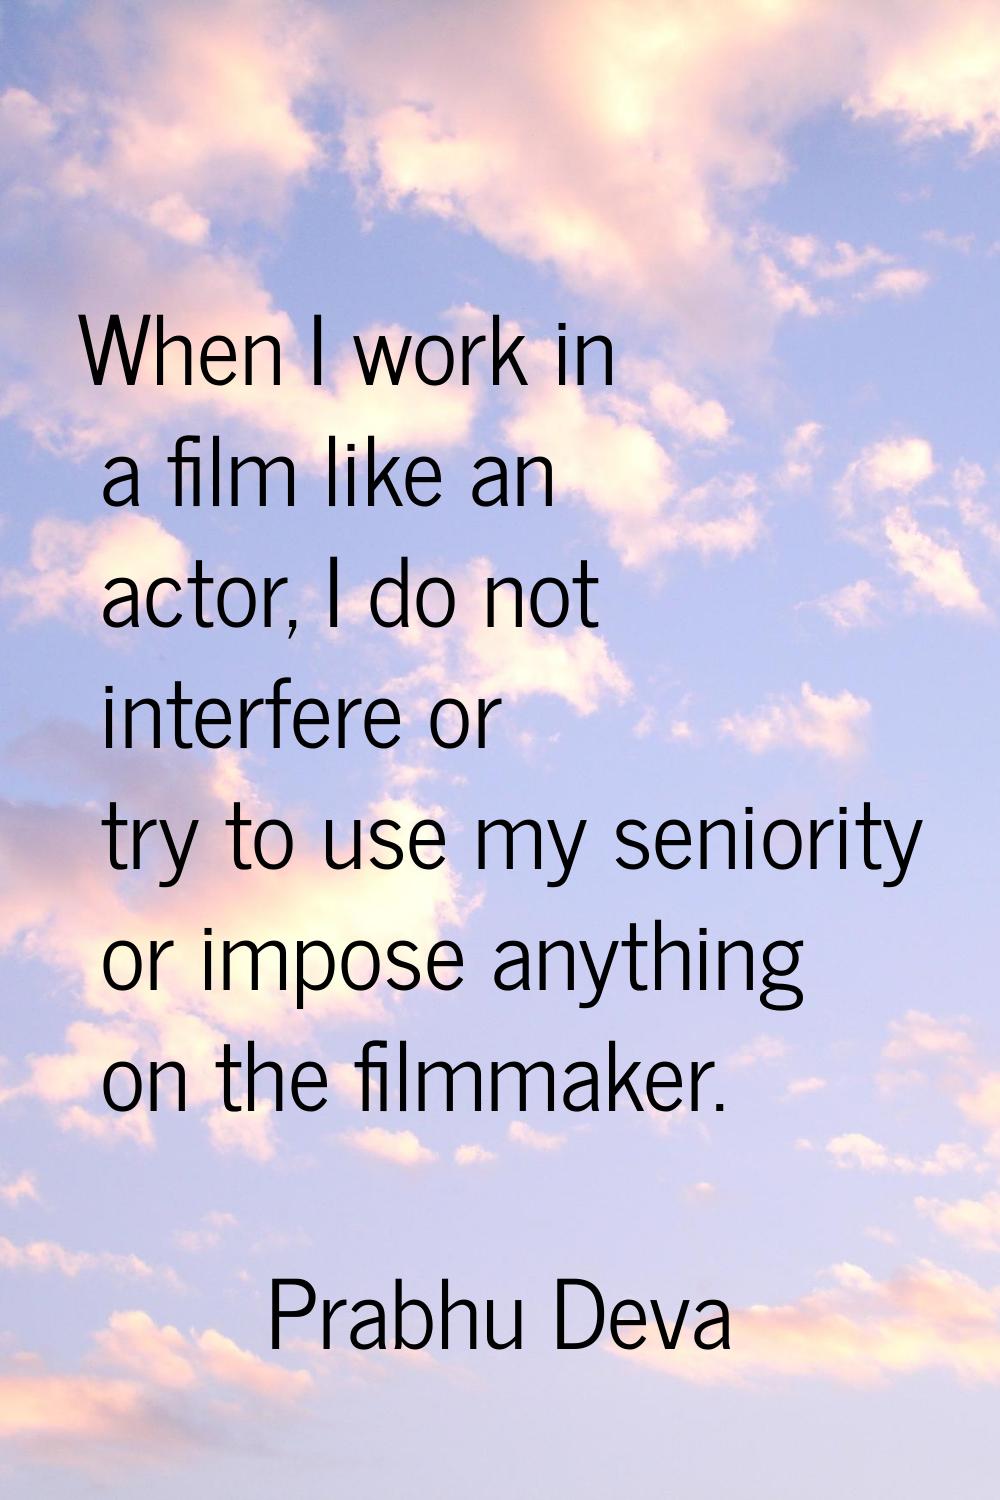 When I work in a film like an actor, I do not interfere or try to use my seniority or impose anythi